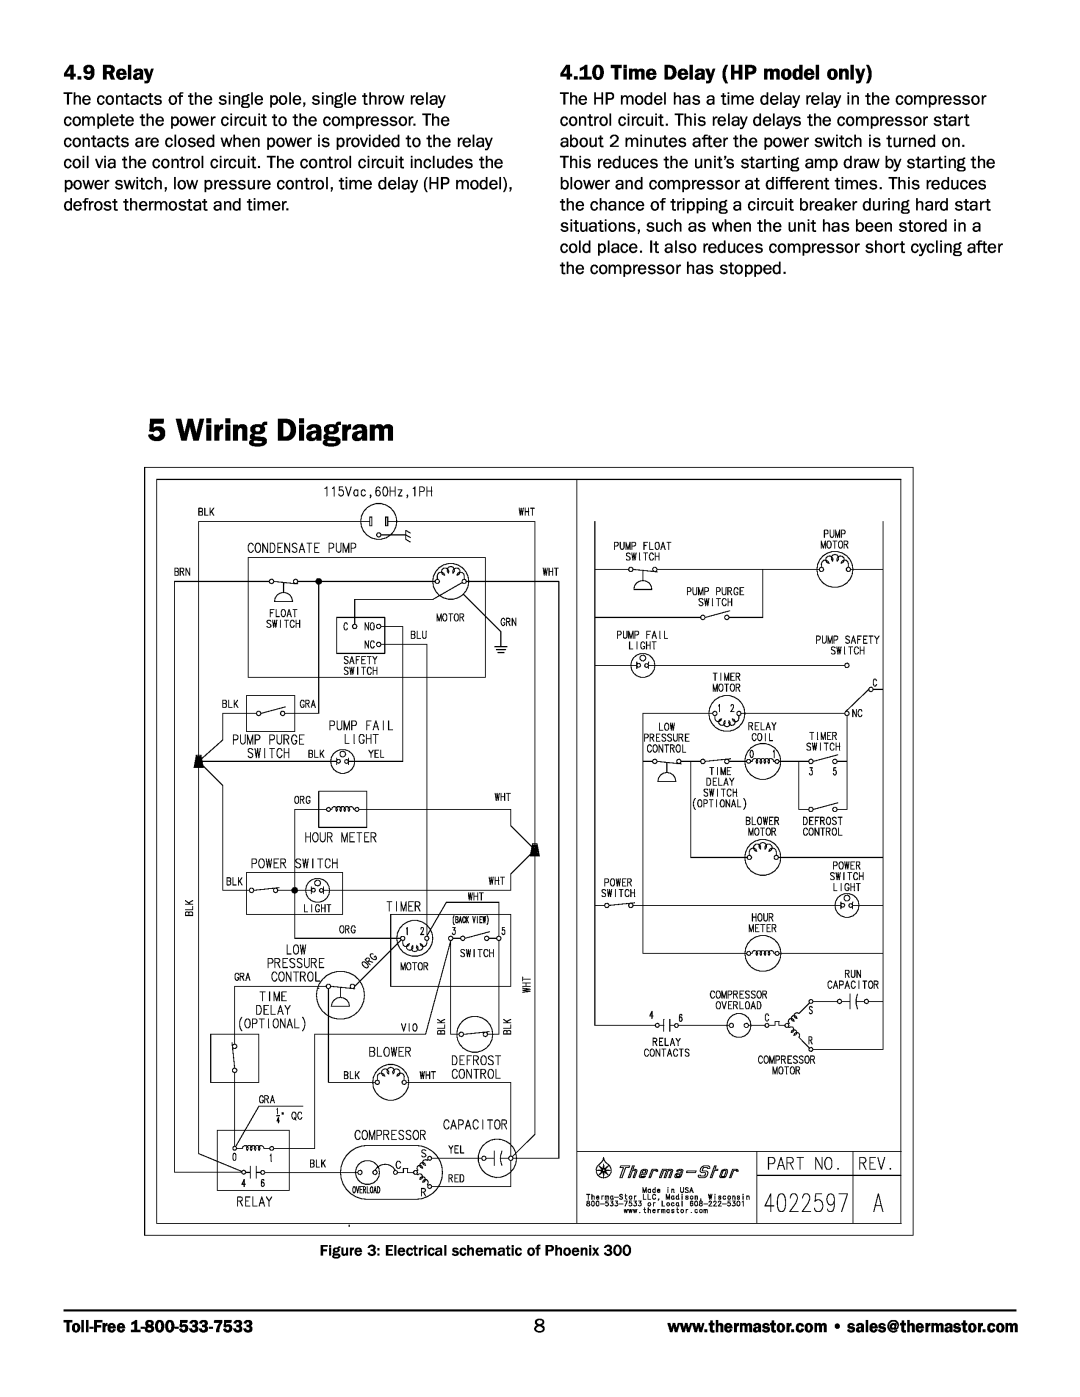 Therma-Stor Products Group 300 owner manual Wiring Diagram, Relay, Time Delay HP model only 